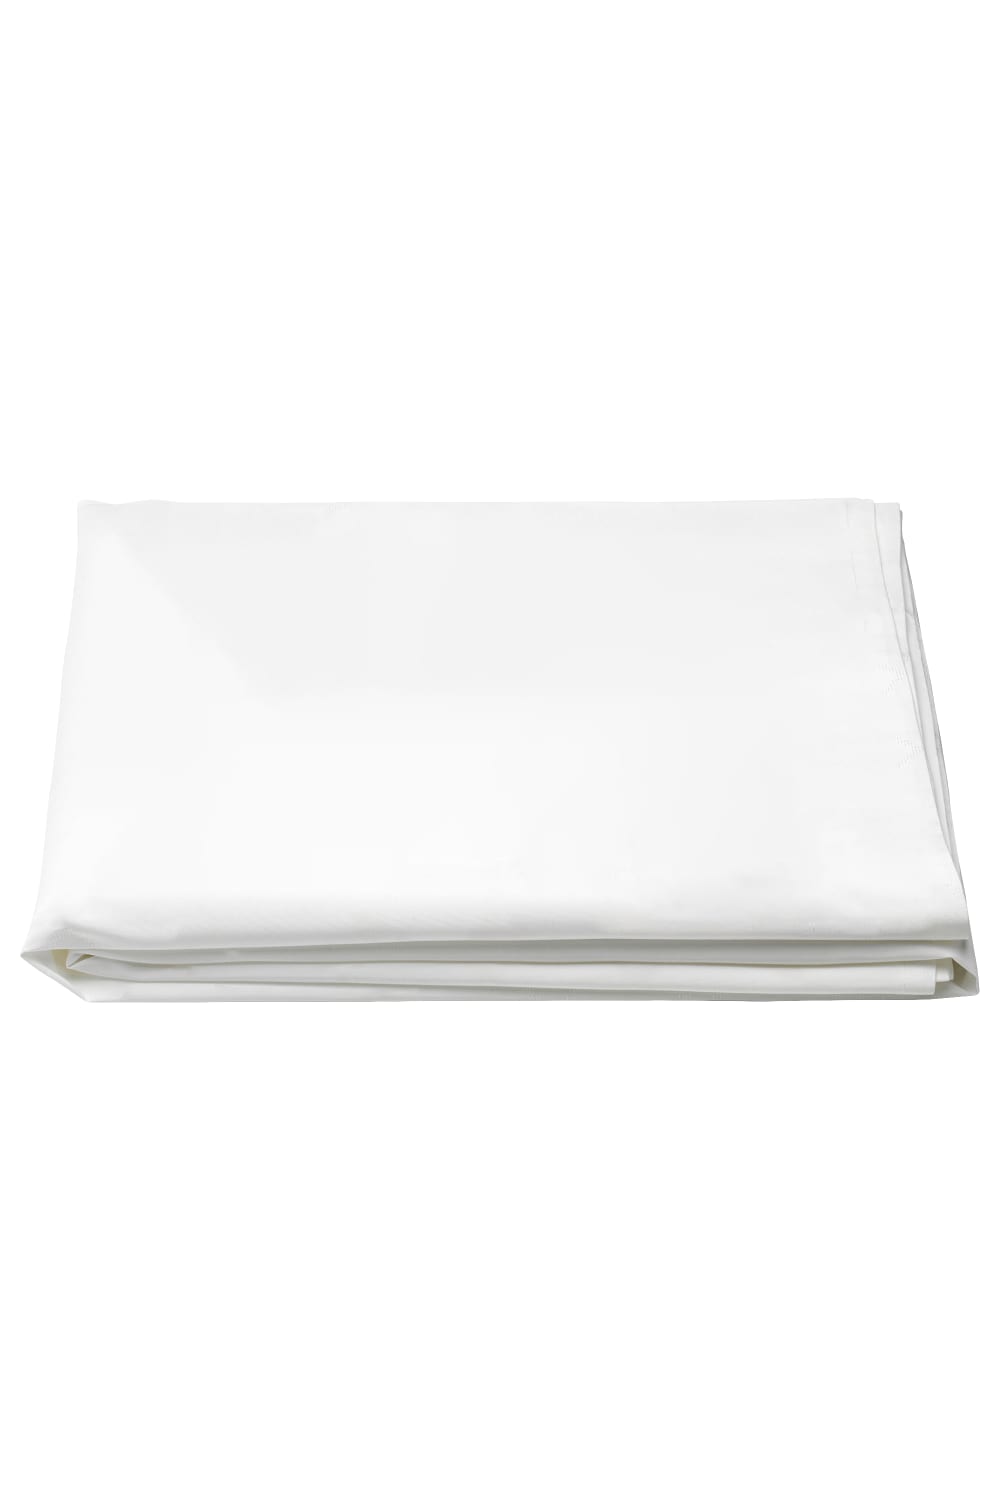 Home & Living Linen Look Tablecloth (White) (M)